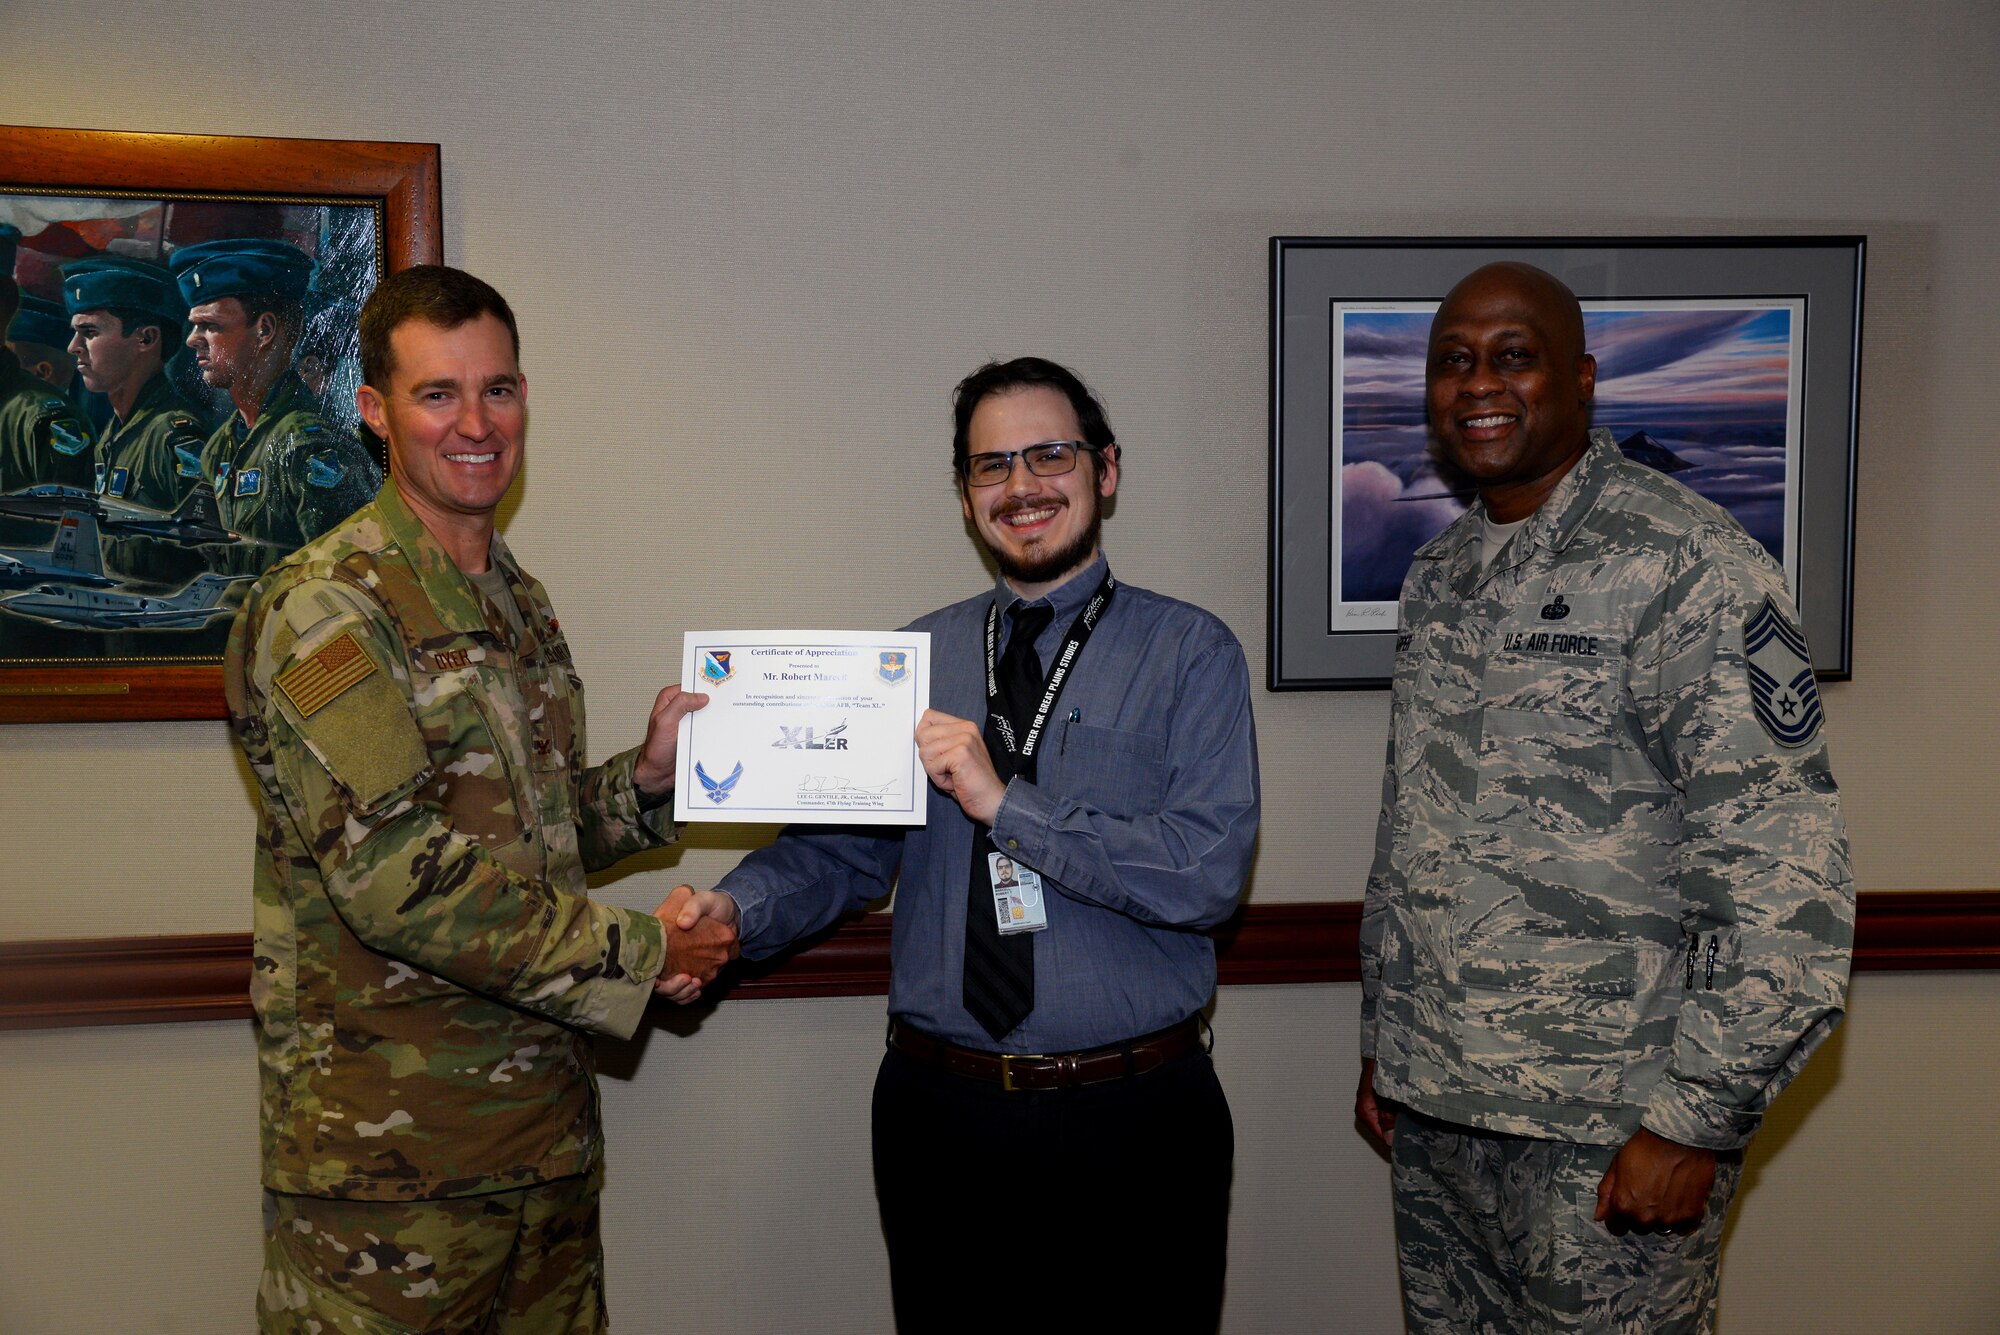 Robert Marcell, the 47th Flying Training Wing historian, was chosen by wing leadership to be the “XLer of the week” for the week of August 5, 2019 at Laughlin Air Force Base, Texas. The “XLer of the Week” award, presented by Col. Todd Dyer, the 47th Flying Training Wing vice commander, and Chief Master Sgt. Ronald Harper, the 47 Mission Support Group superintendent, is given to those who consistently make outstanding contributions to their unit and the Laughlin mission. (U.S. Air Force photo by Senior Airman John A. Crawford)